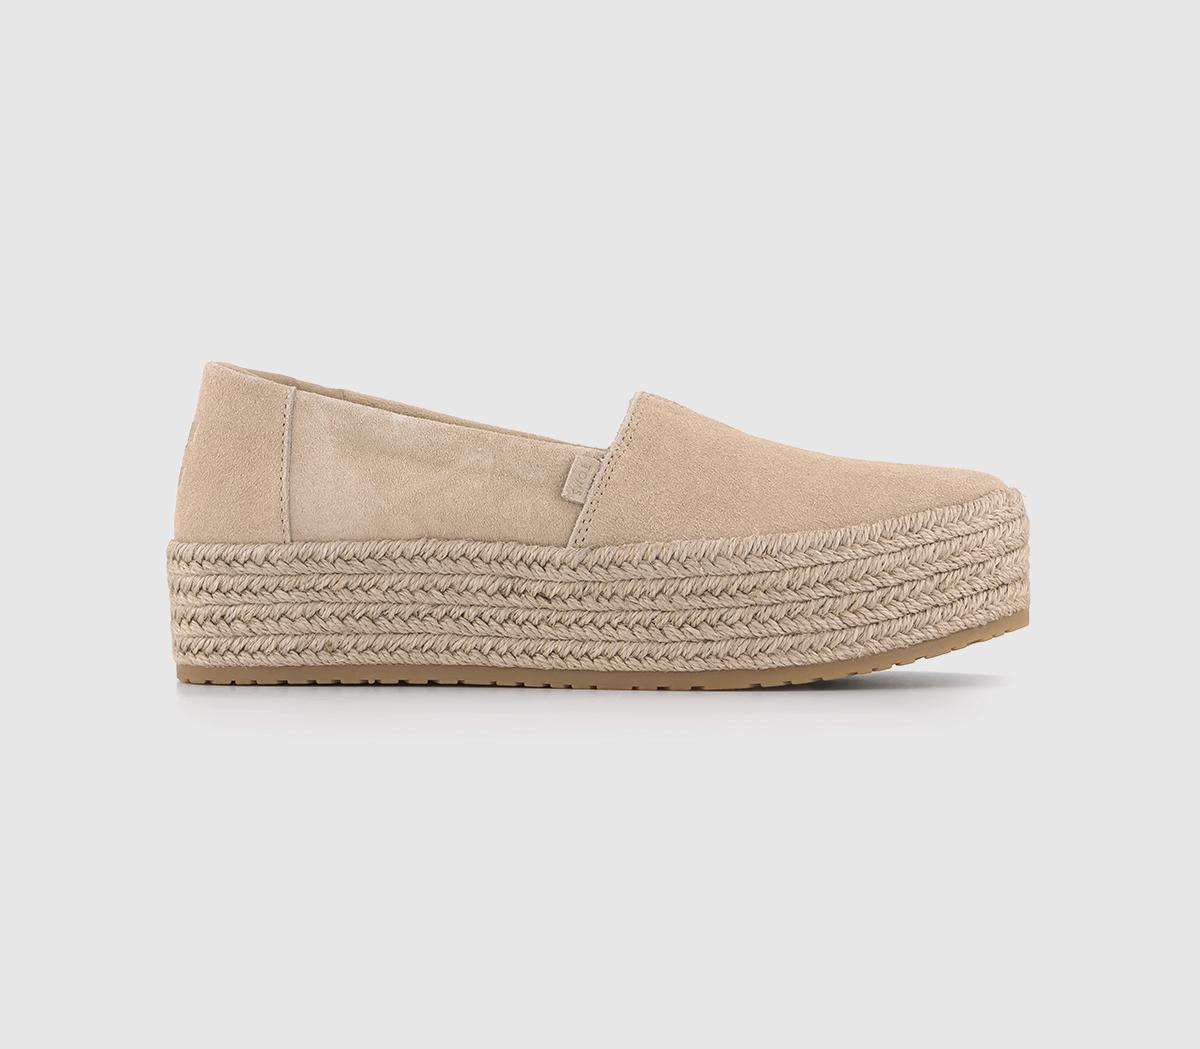 TOMSValencia EspadrillesOatmeal Suede